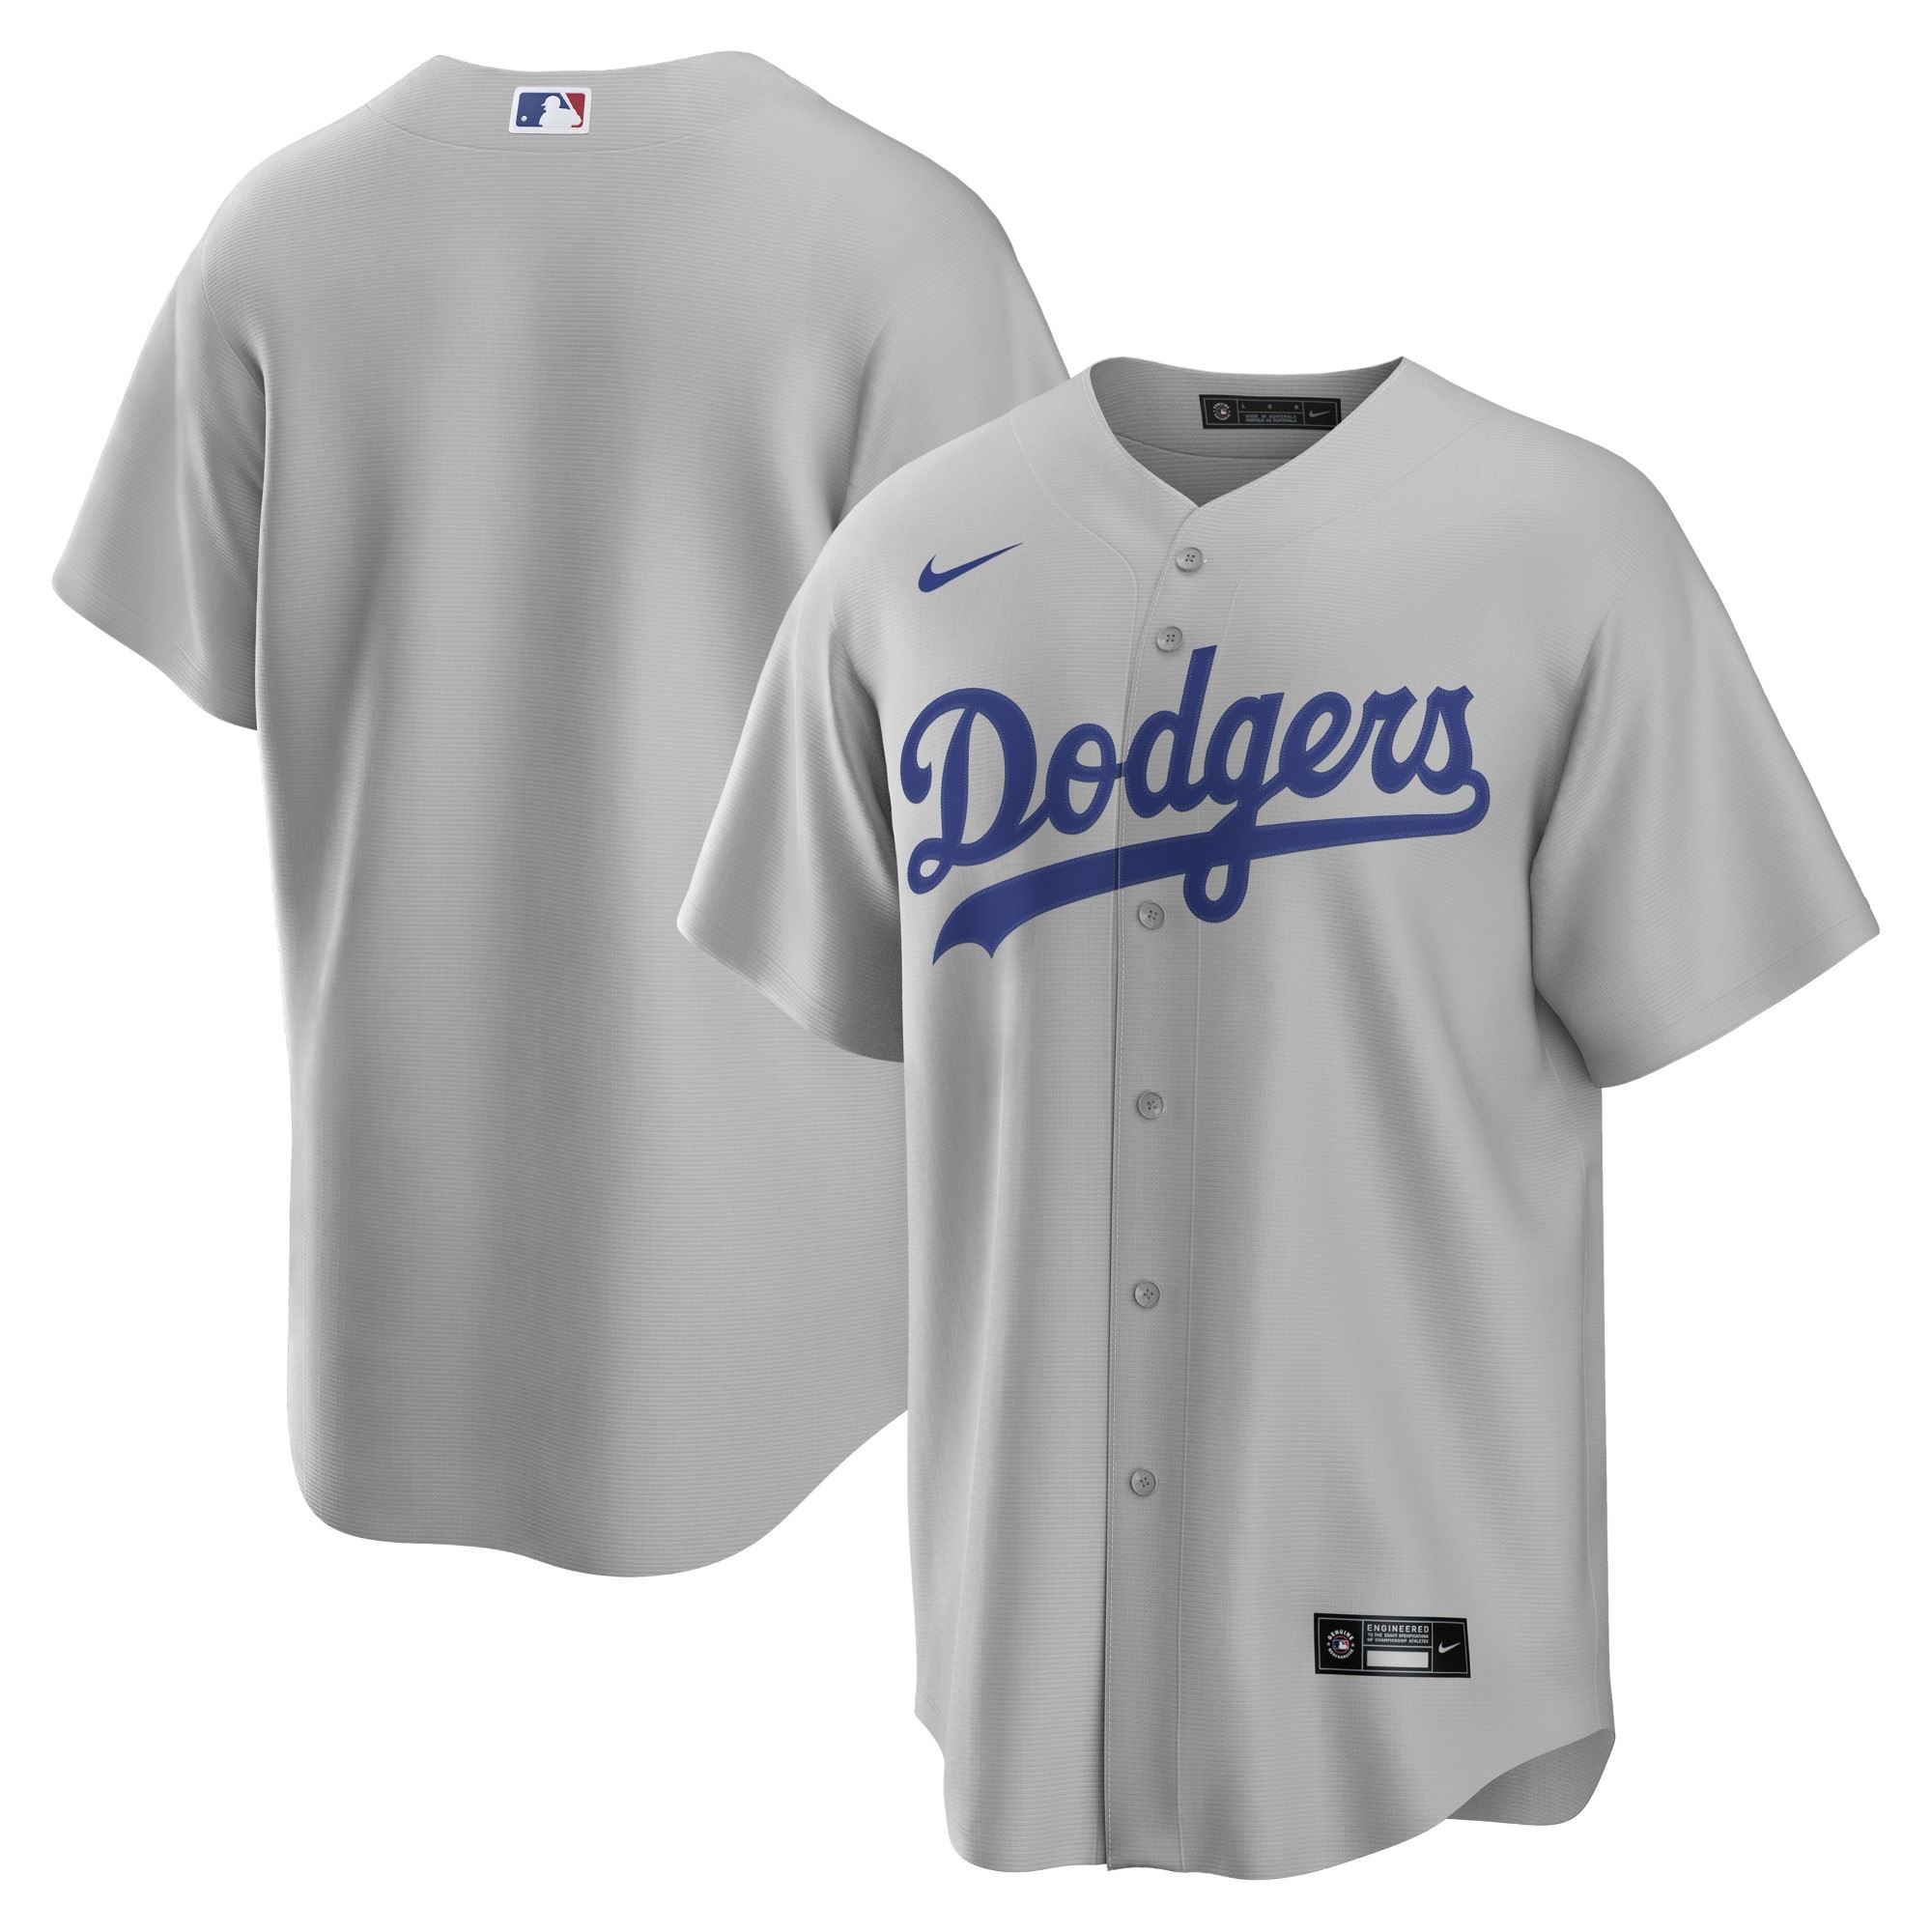 Los Angeles Dodgers Gray Official MLB Replica Alternate Road Jersey Nike